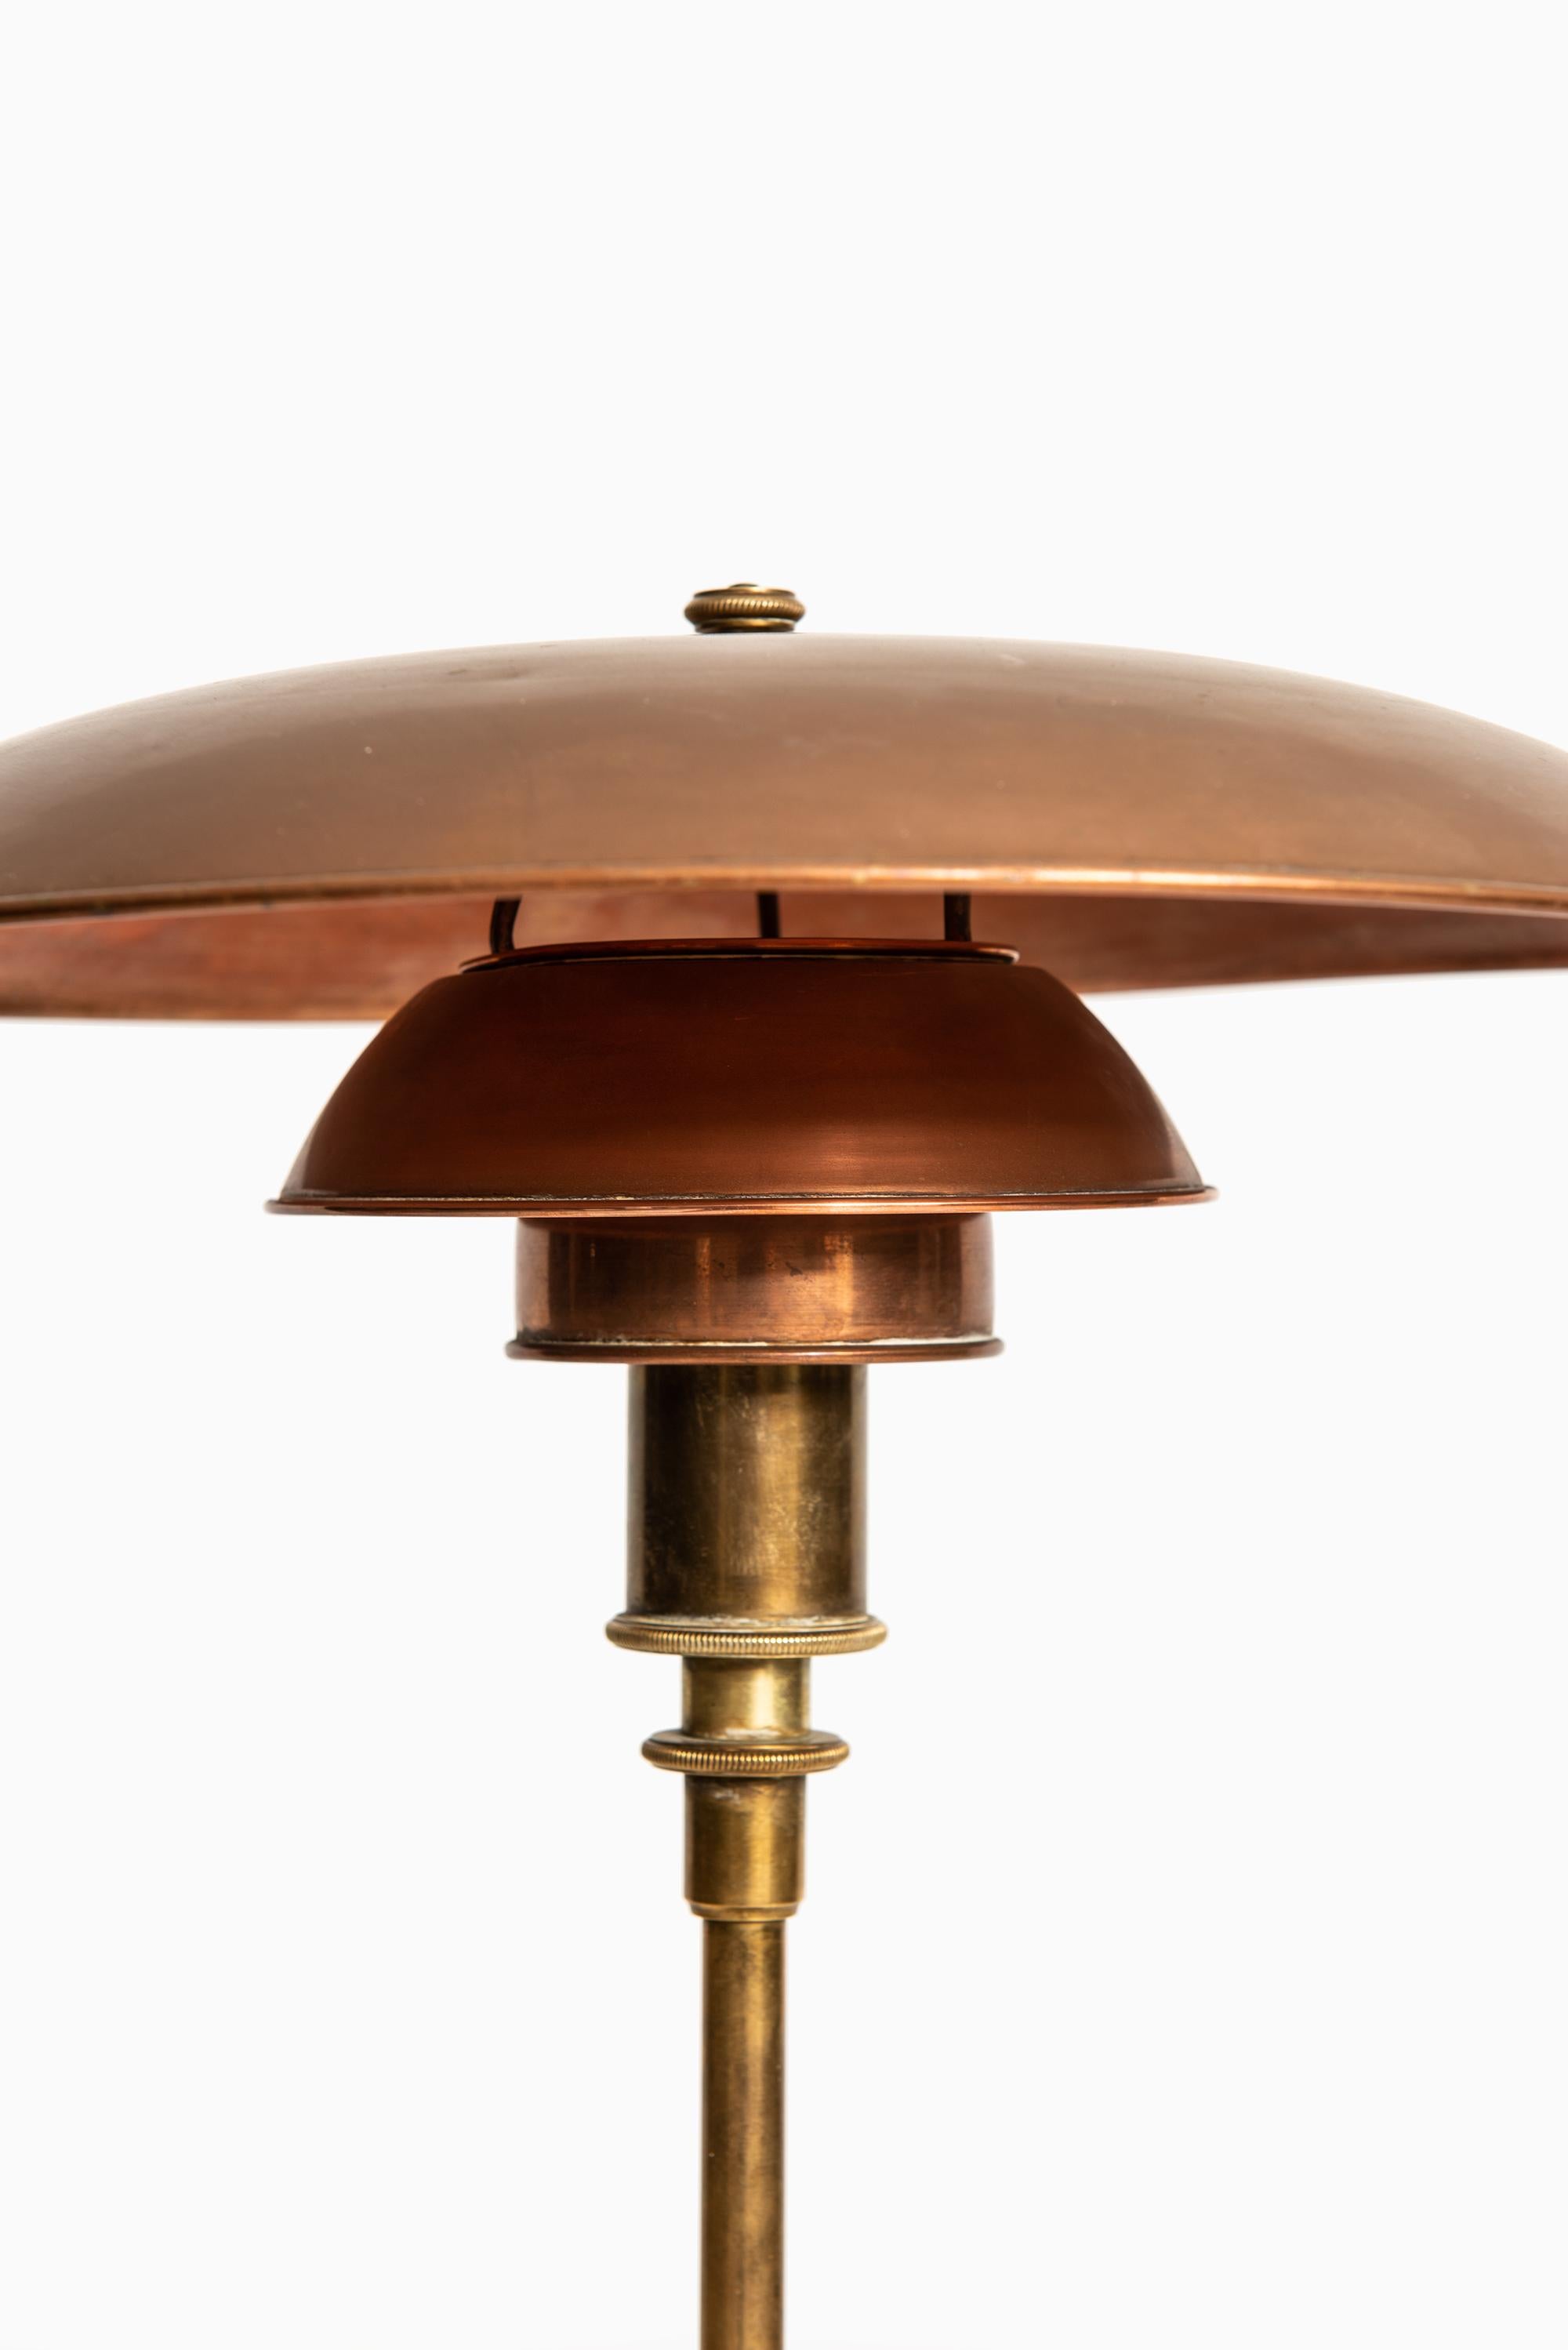 Rare table lamp model PH 3½/2 designed by Poul Henningsen. Produced by Louis Poulsen in Denmark. Marked “PAT. APPL”.